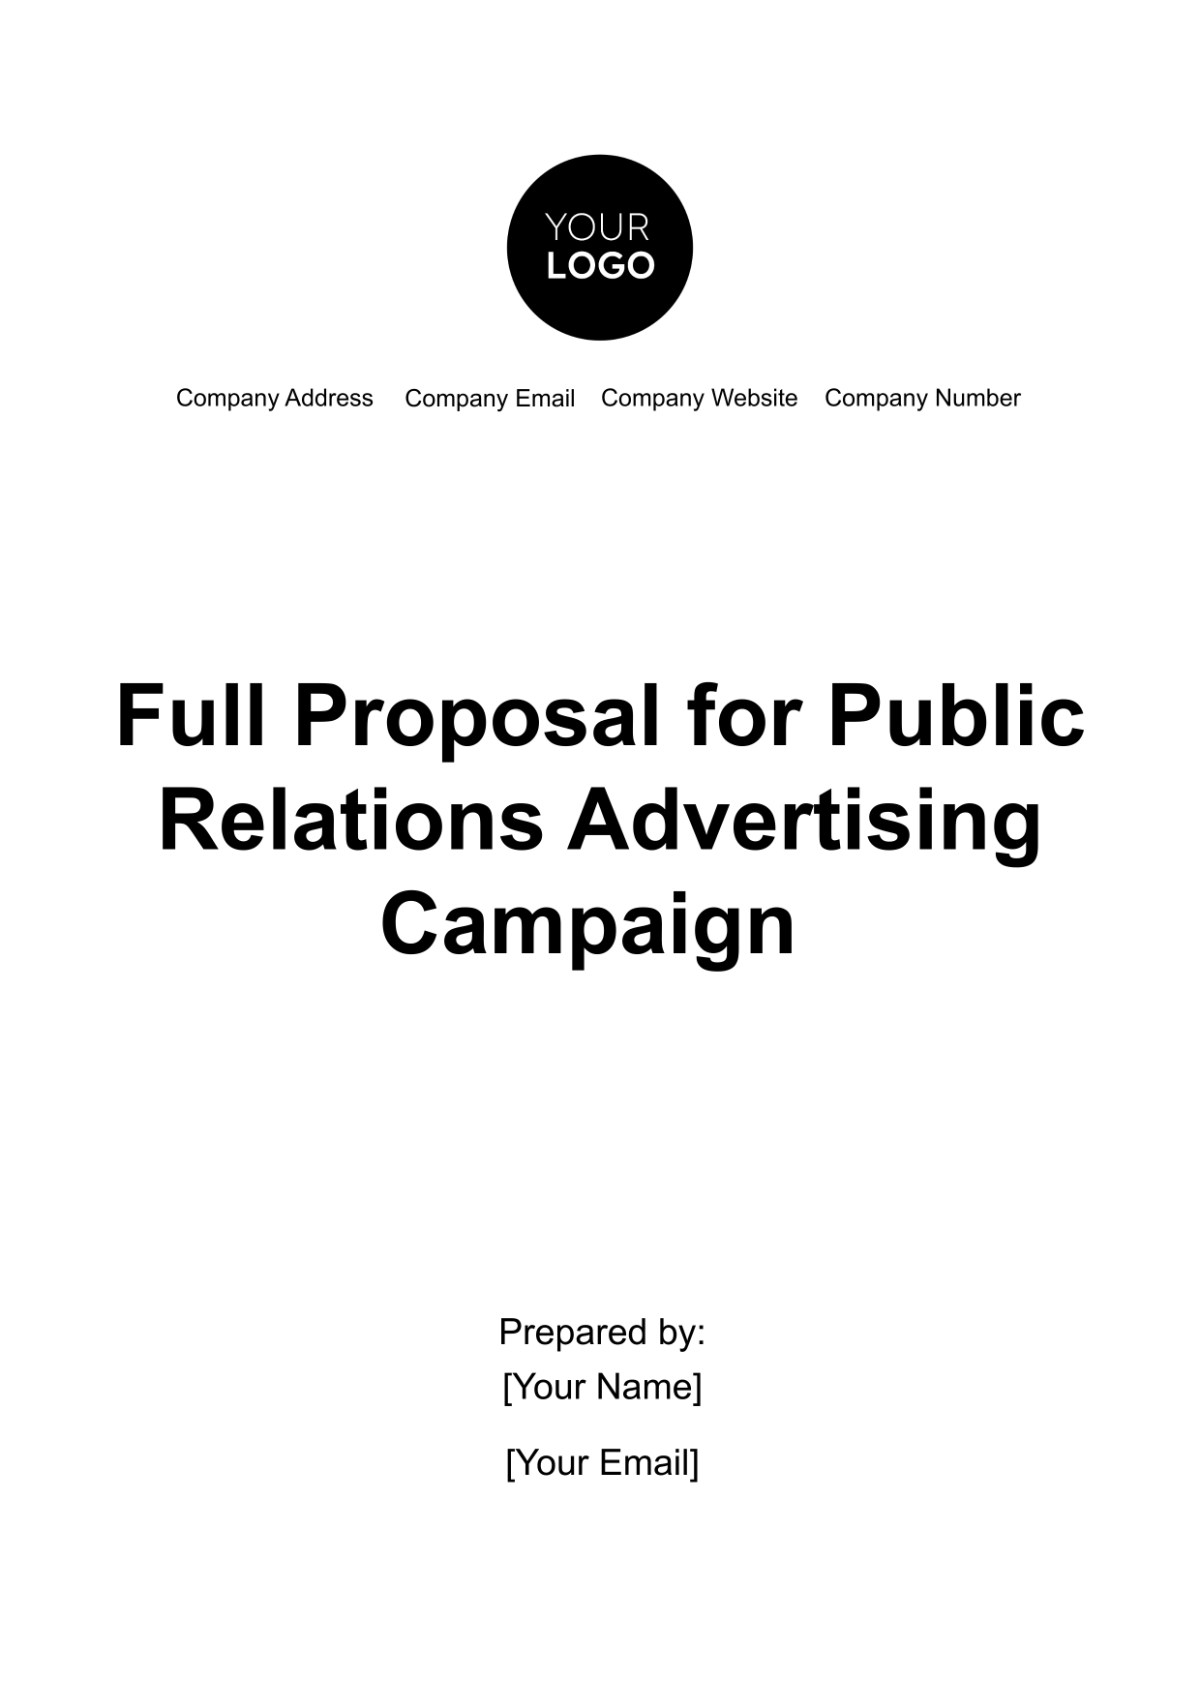 Free Full Proposal for Public Relations Advertising Campaign Template